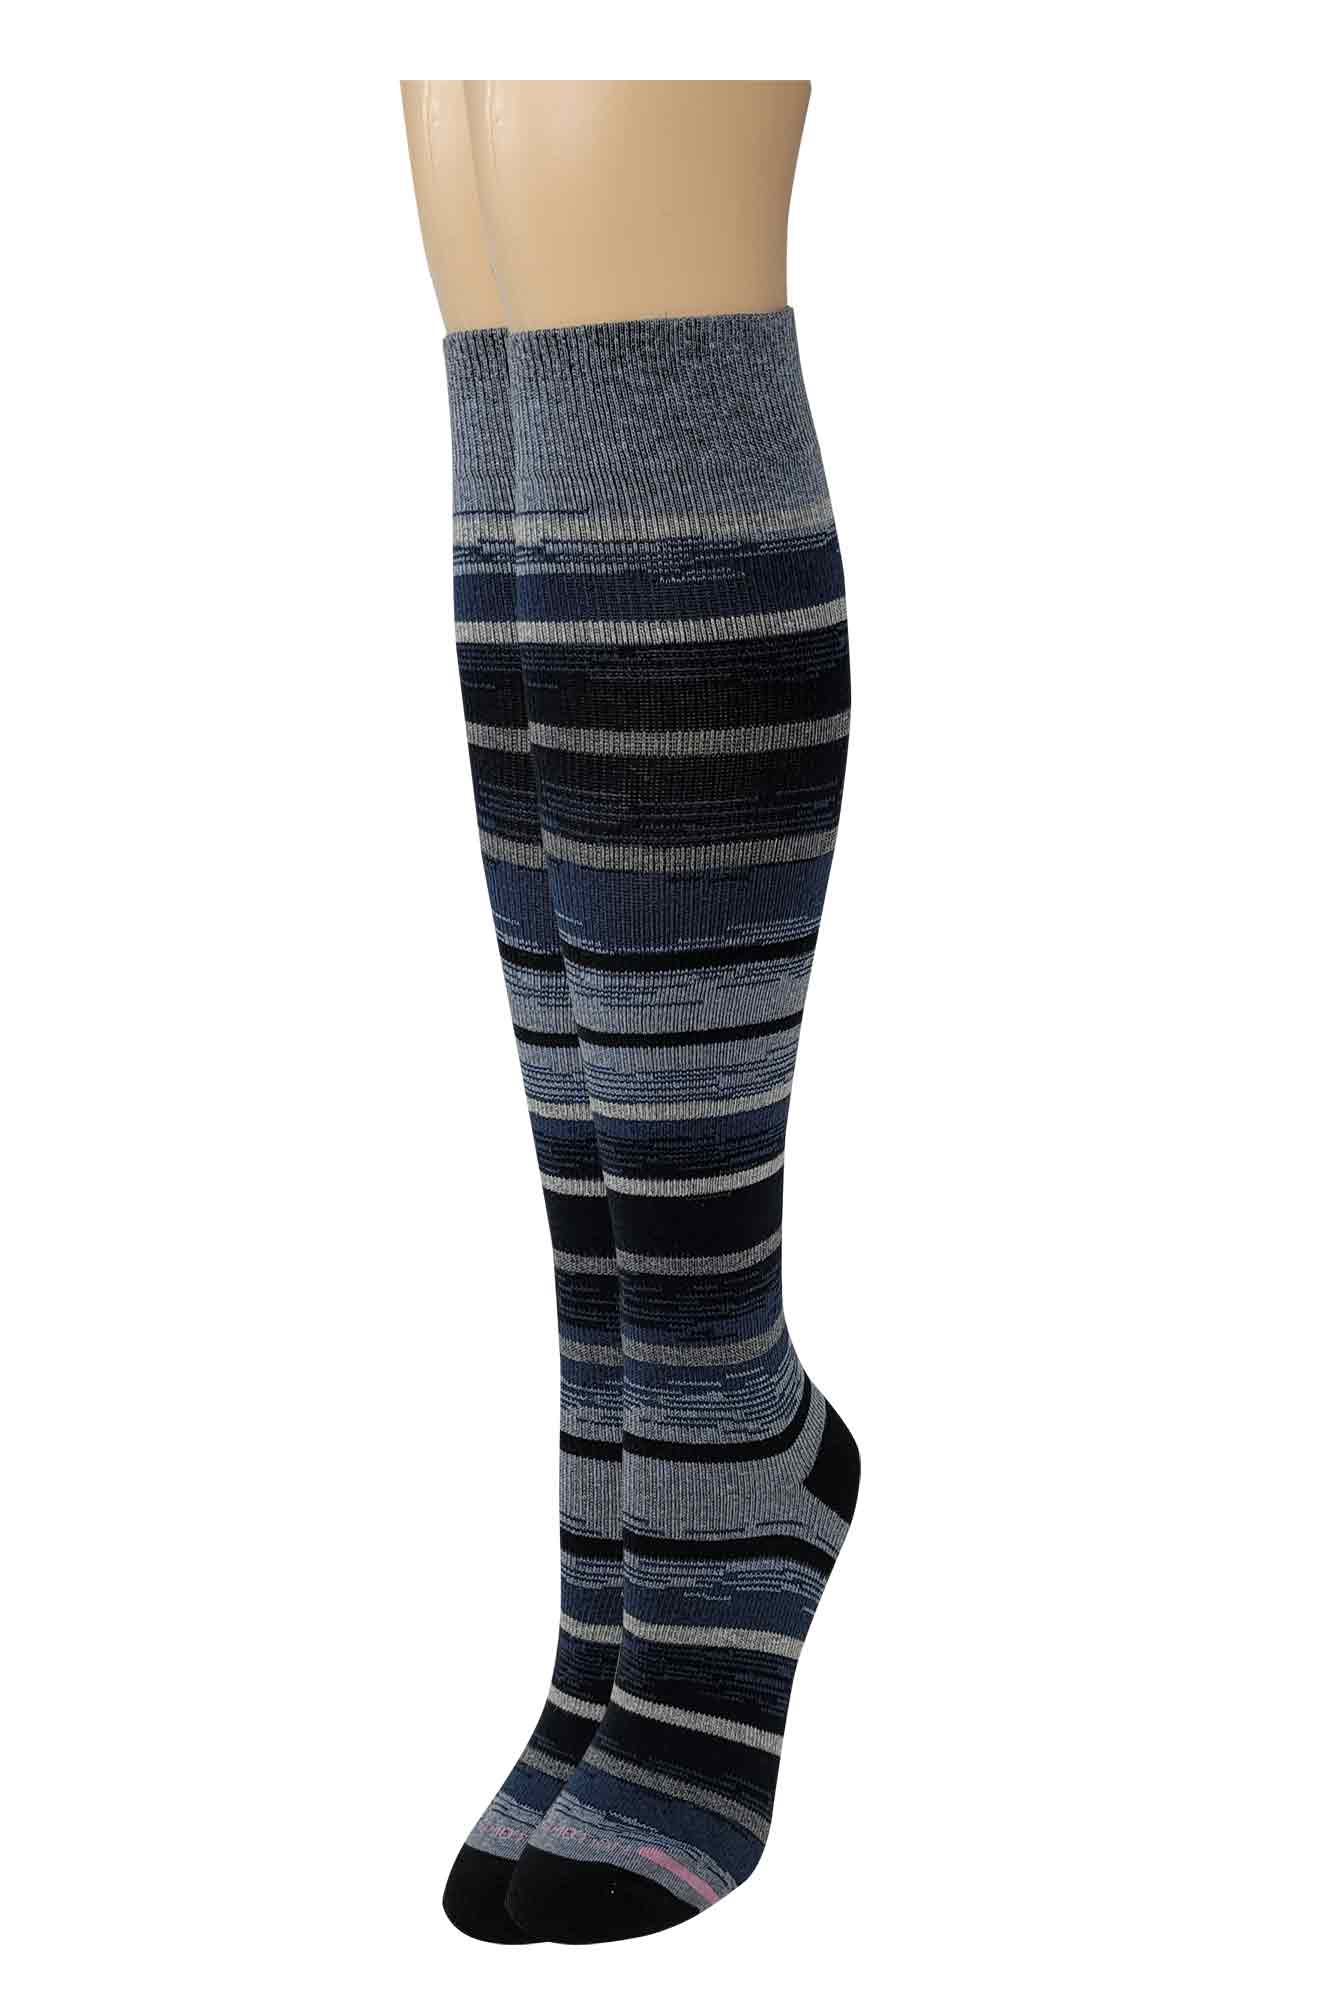 Knee High Compression Socks | Ombre Design | Women's (1 Pair)